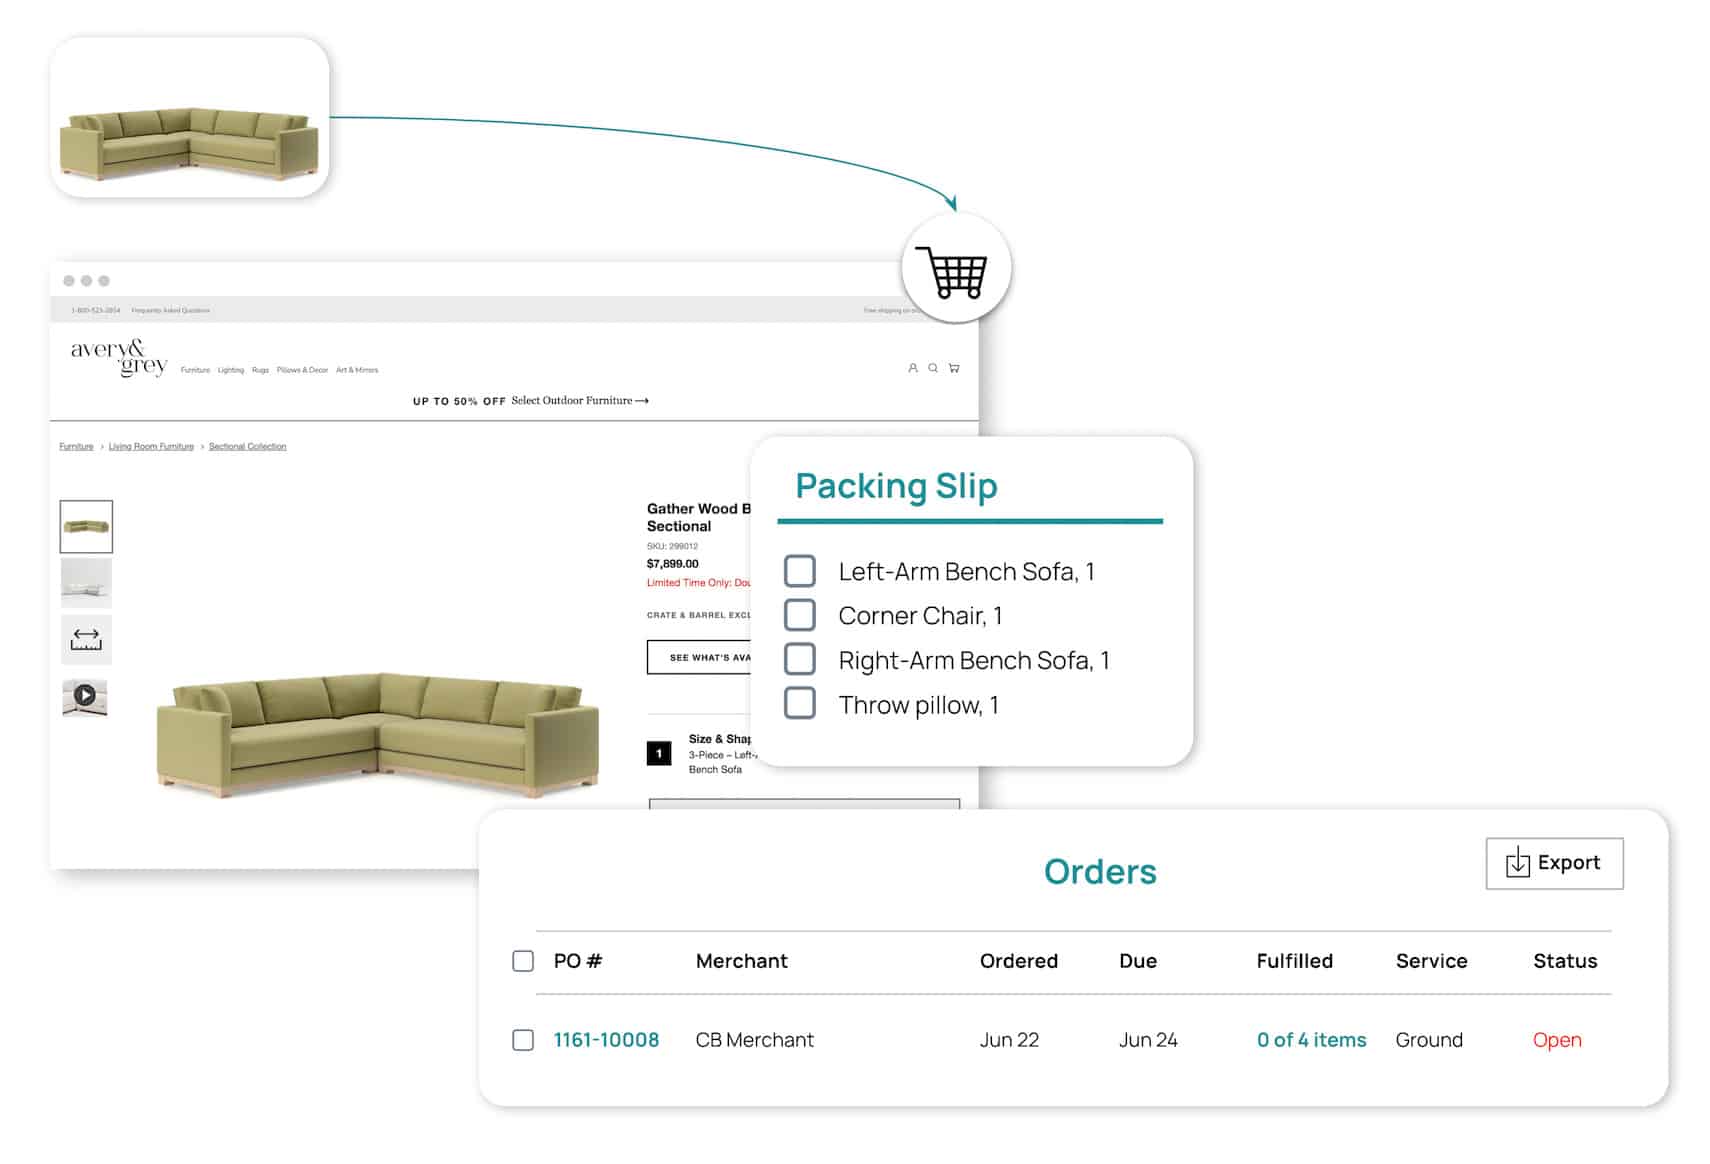 With our August product update, it's easier than ever to share customer orders on fabric Marketplace.